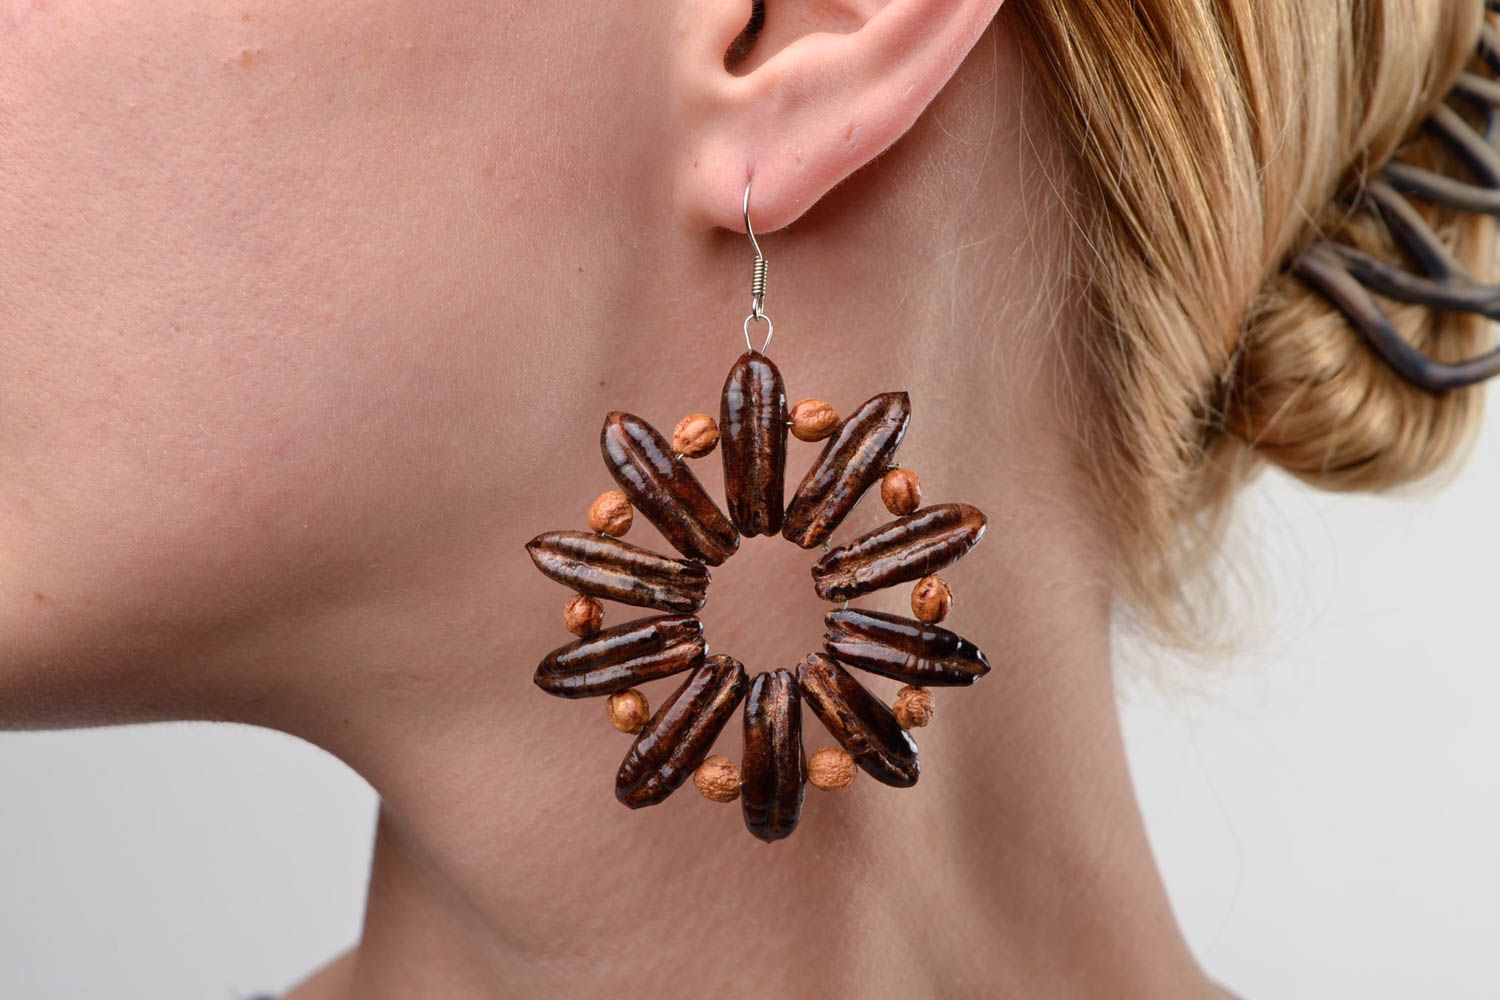 Wooden jewelry handmade earrings wood earrings fashion accessories gifts for her photo 1